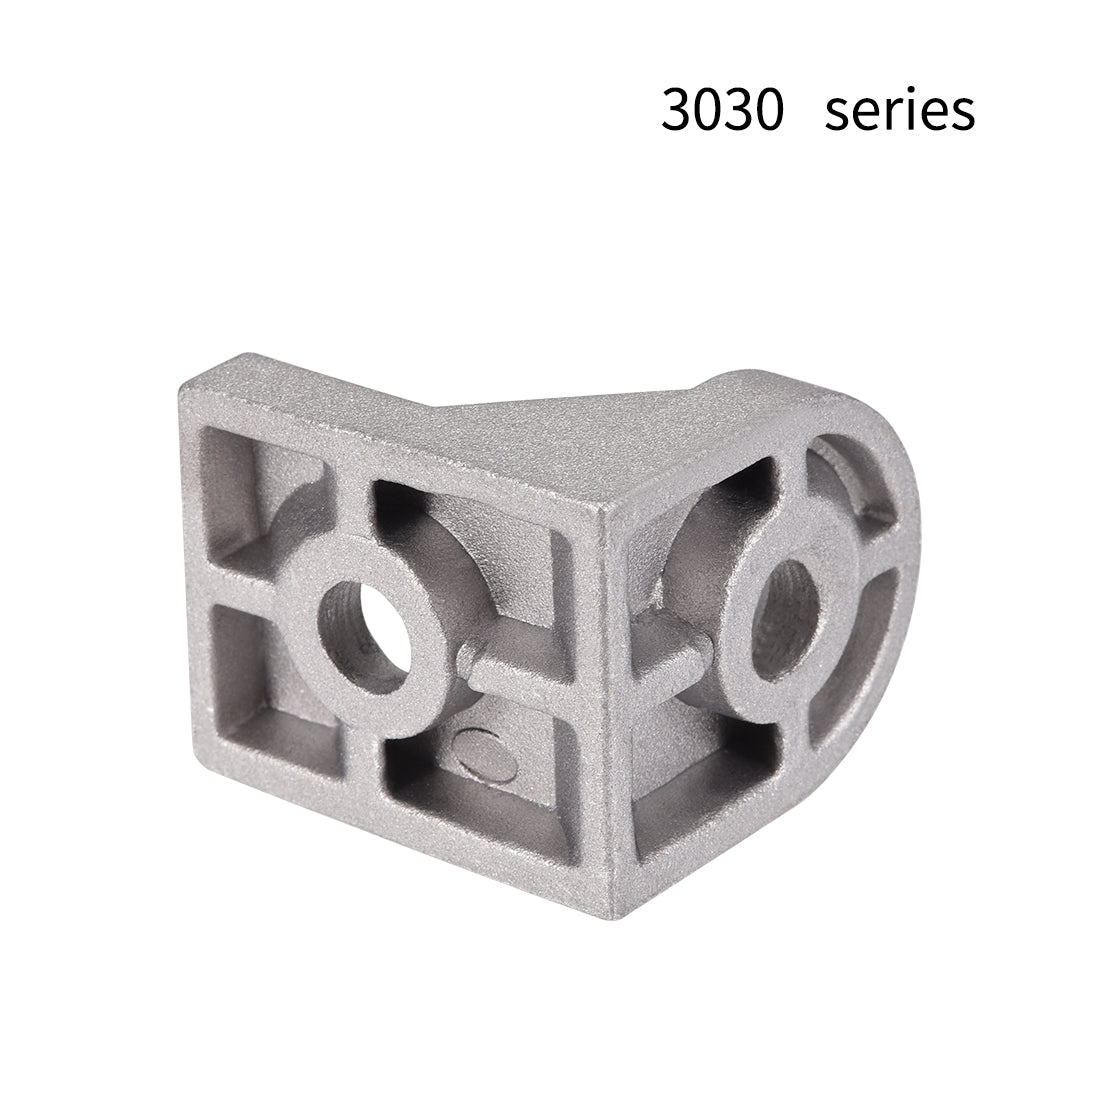 uxcell Uxcell Angle Arbitrary Bracket Set, Corner L Connector for 3030 Series Aluminum Extrusion Profile with Slot 8mm, 6 Pcs